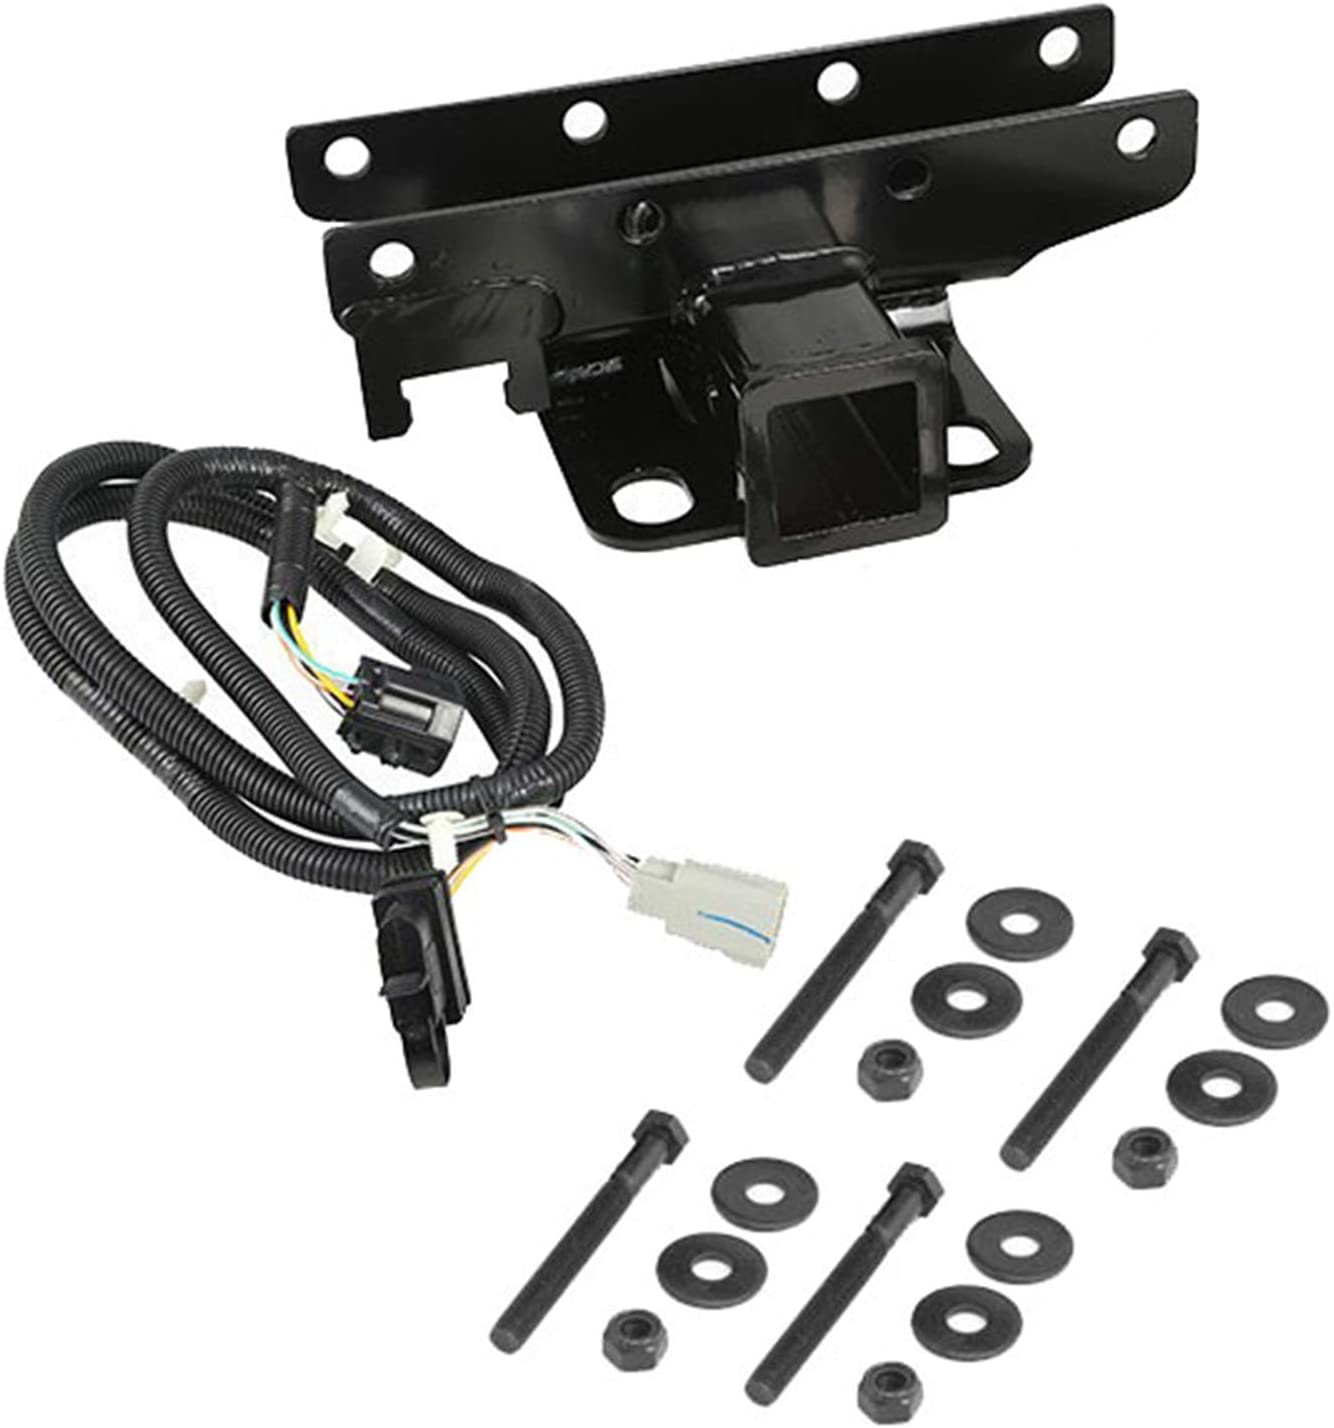 Rugged Ridge 11580.51, Black Receiver Hitch Kit with Wiring Harness for 2007-2018 Jeep Wrangler JK Models (Receiver Hitch)